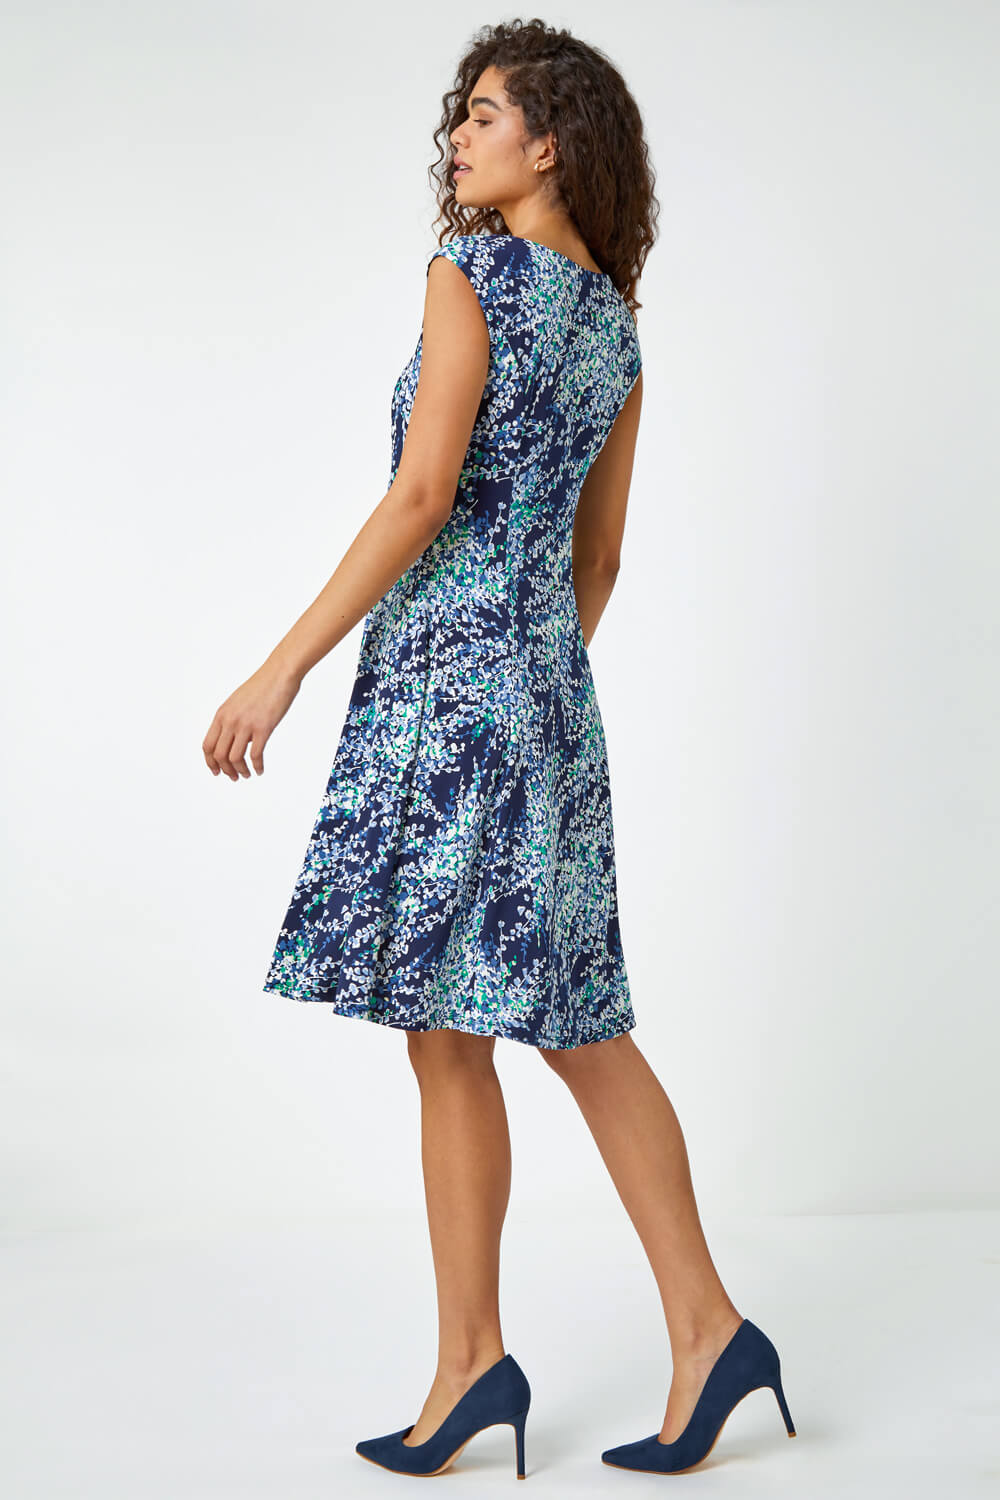 Green Textured Floral Print Ruched Dress, Image 3 of 5